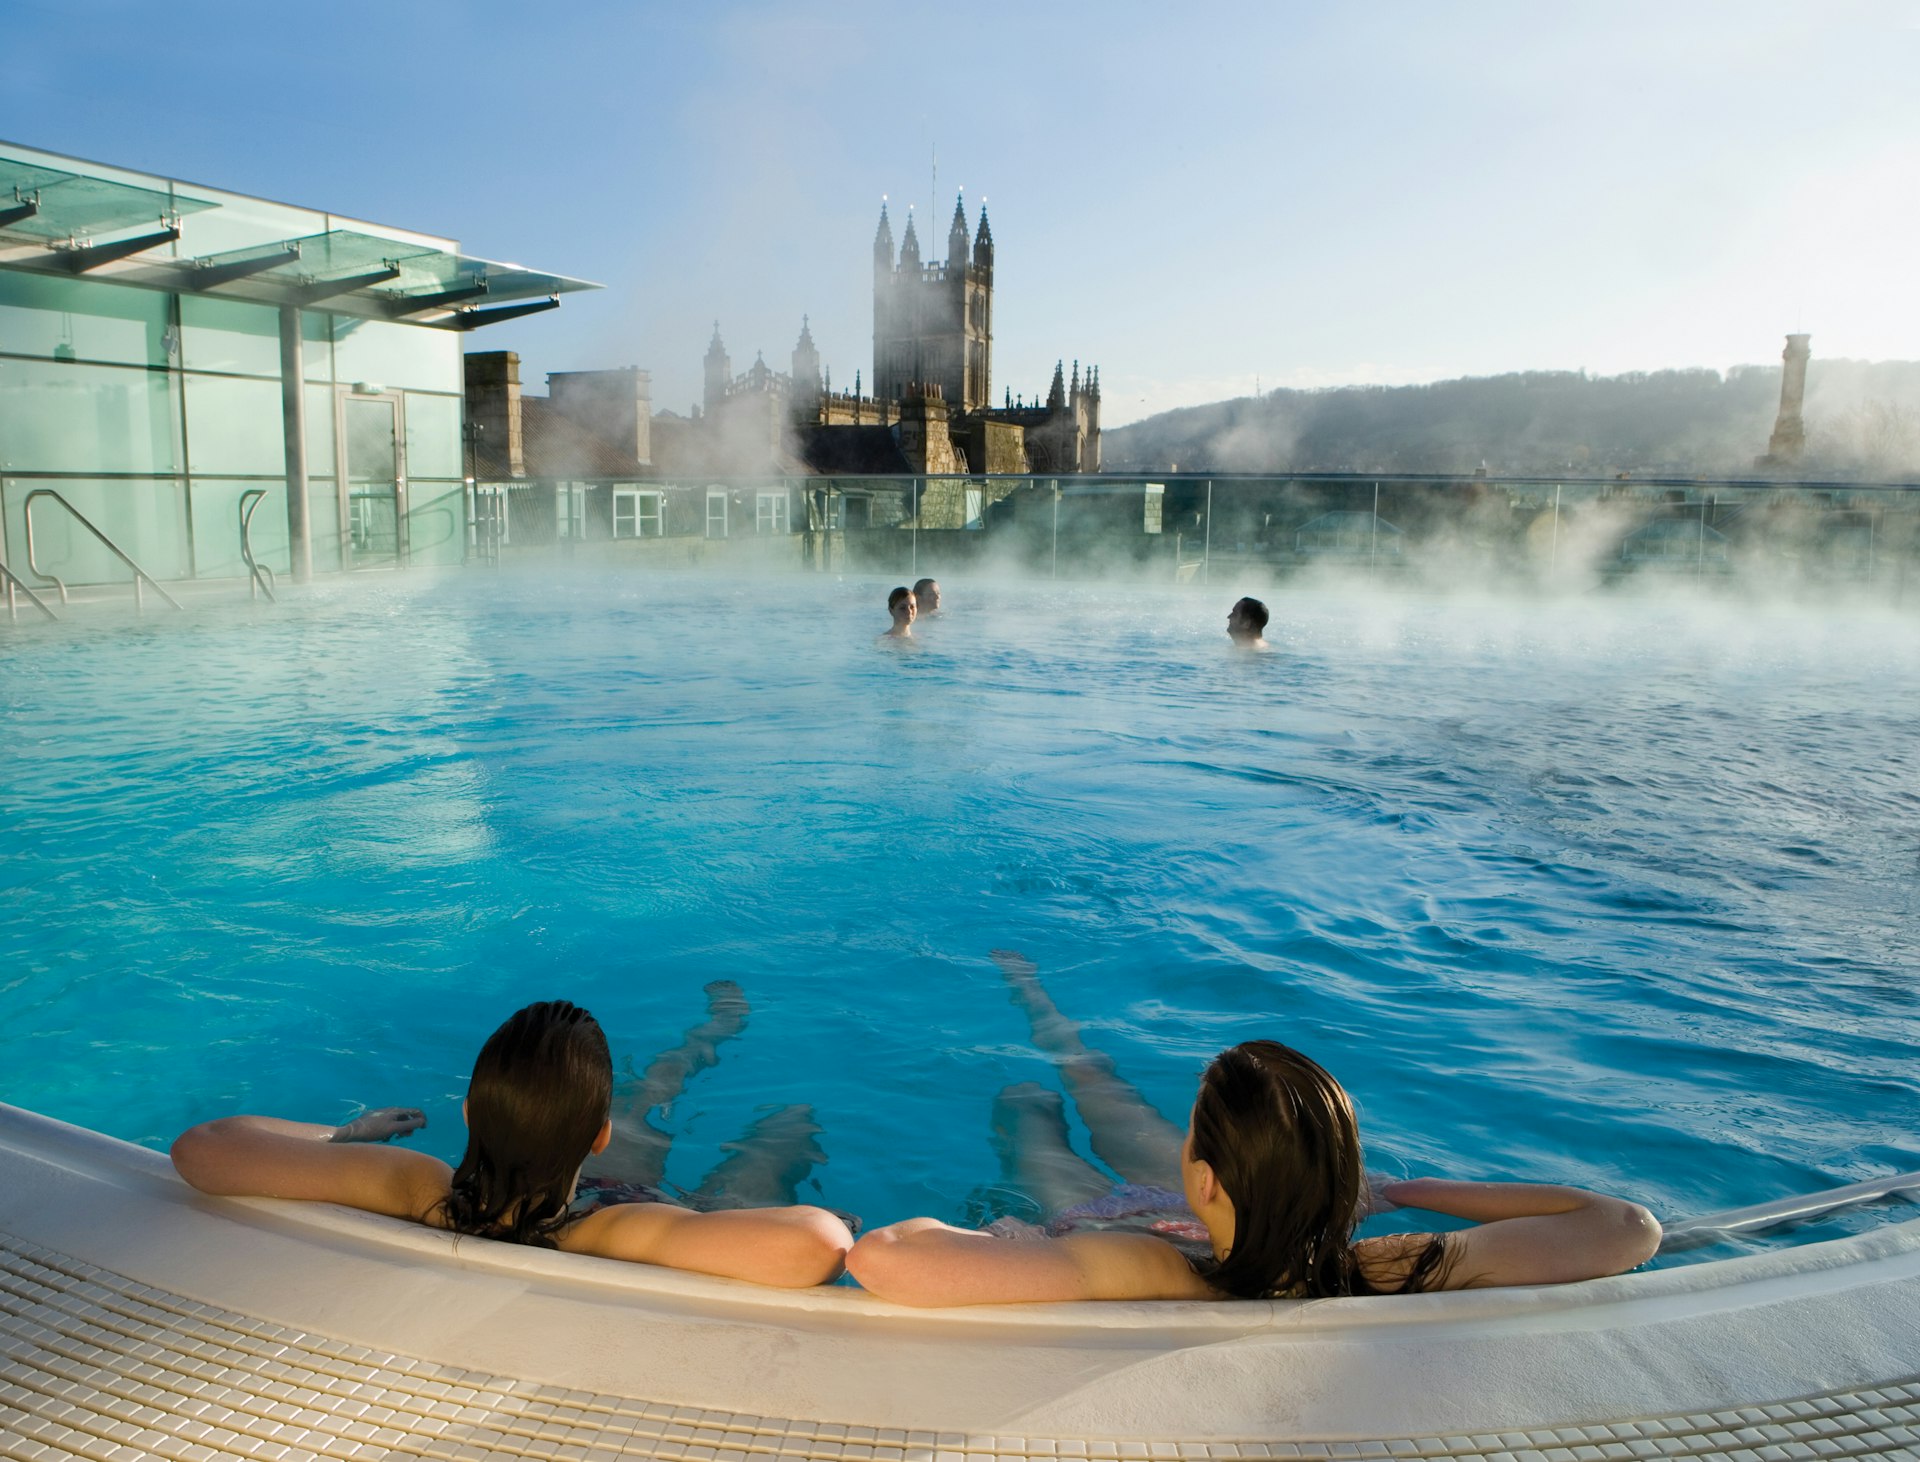 People soaking in the waters at Thermae Bath Spa